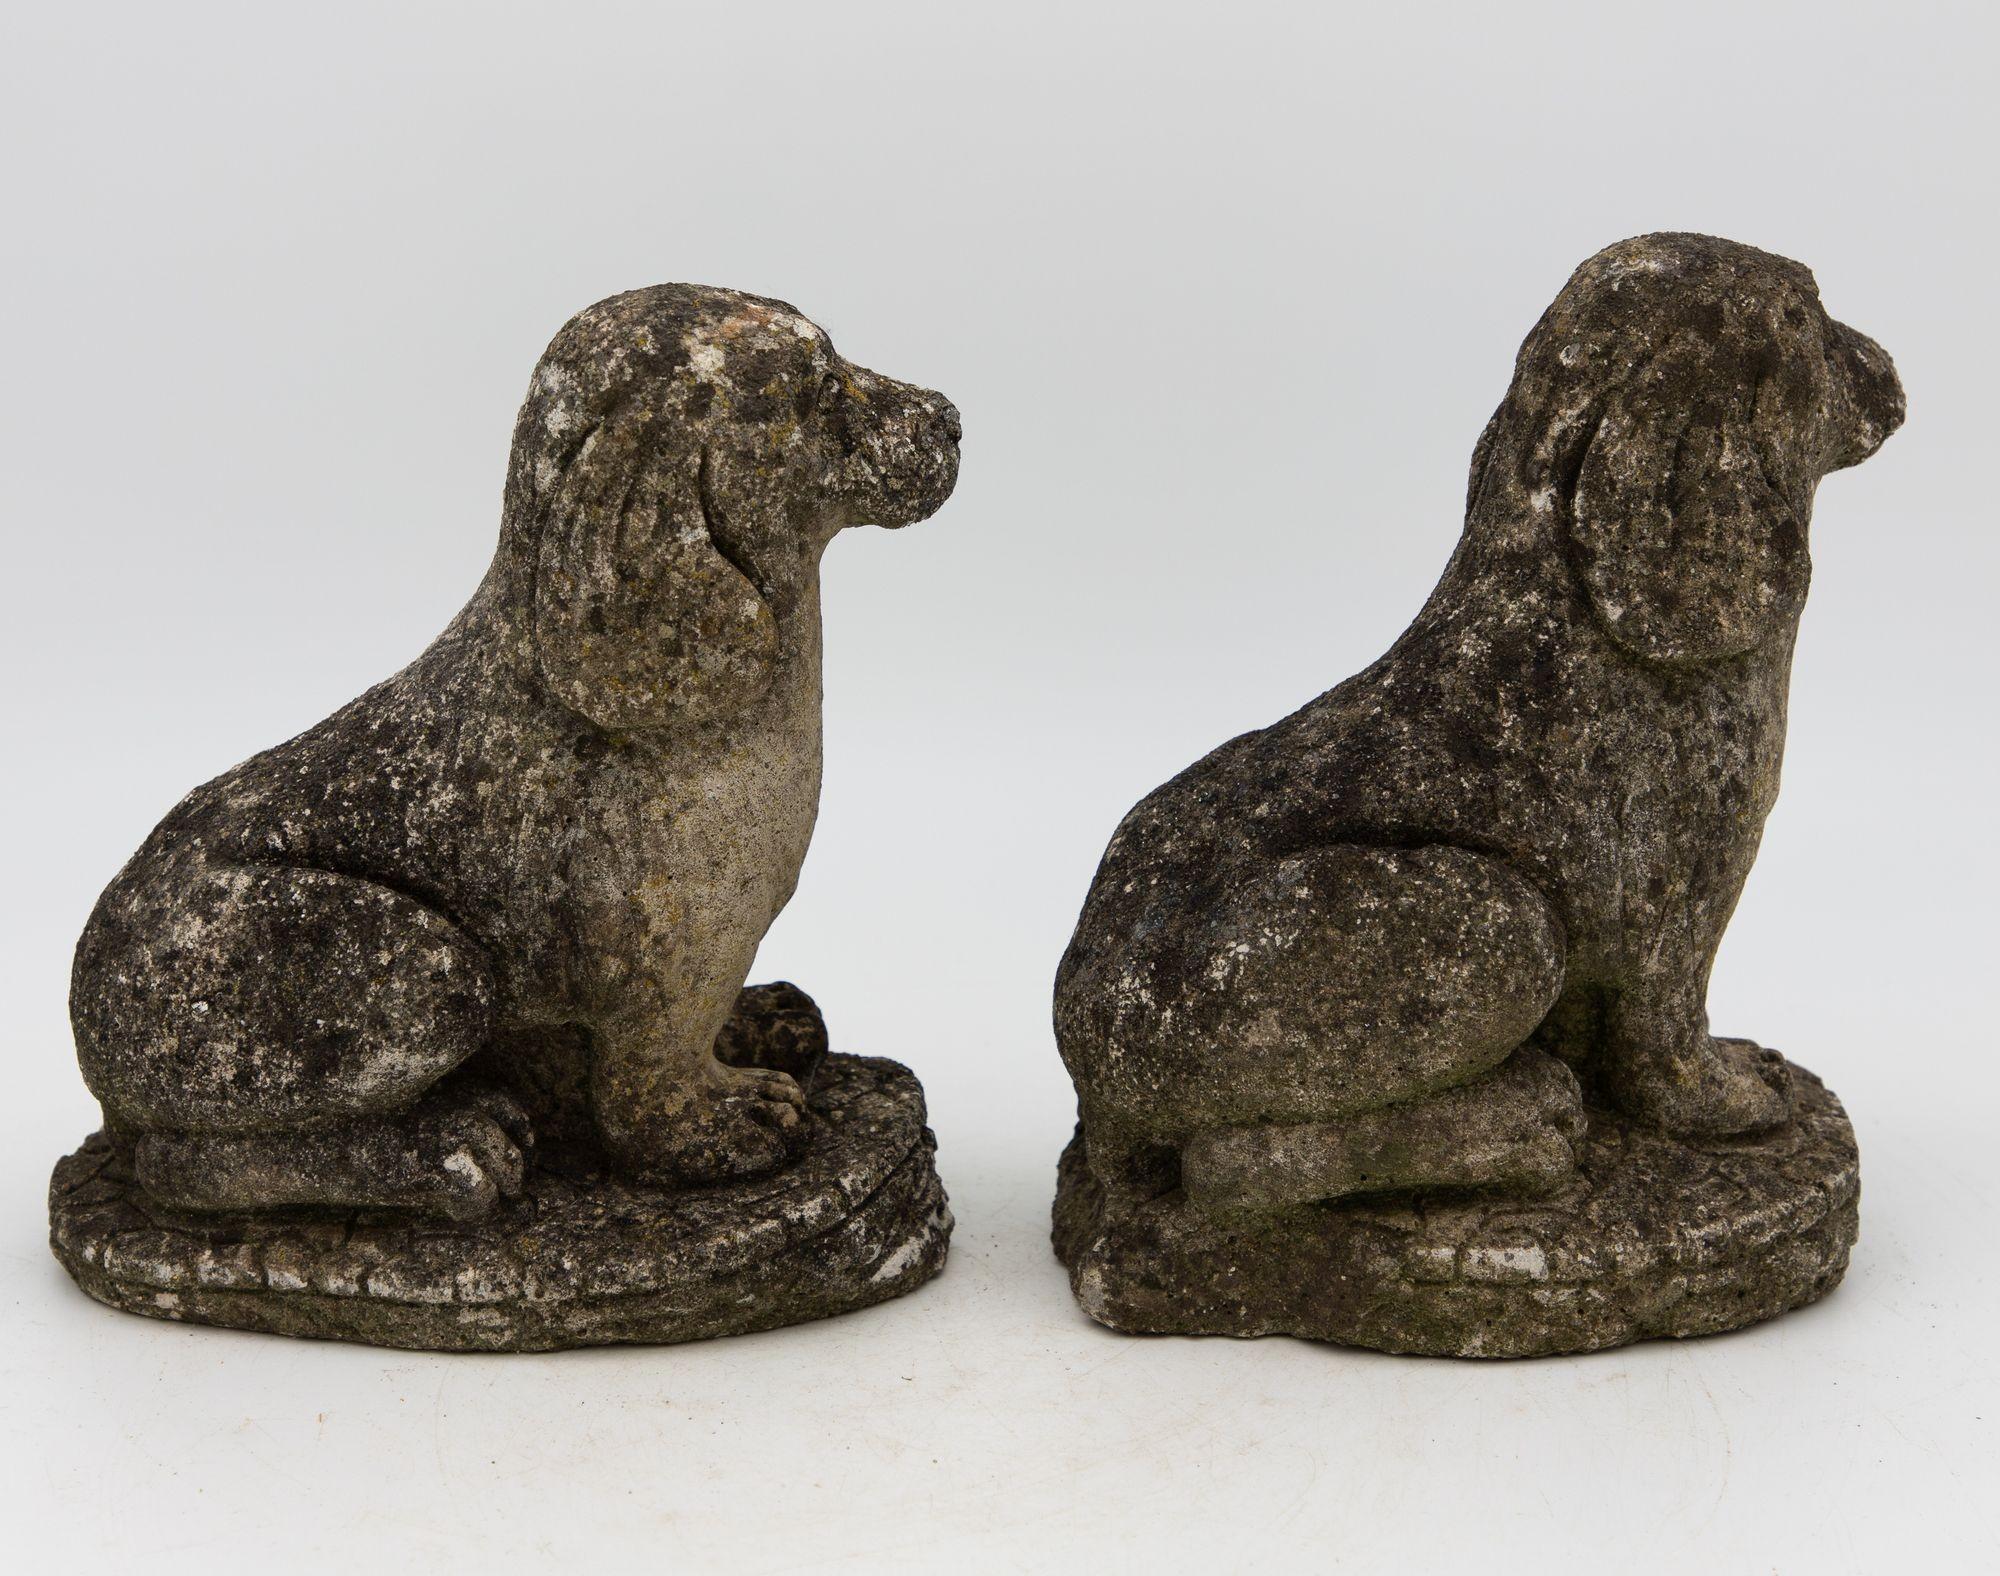 This delightful pair of mid-20th century vintage concrete spaniels is a charming addition to any garden or interior space. Playfully perched on a stone, these small sculptures capture the joyful spirit of these beloved canine companions. With wear